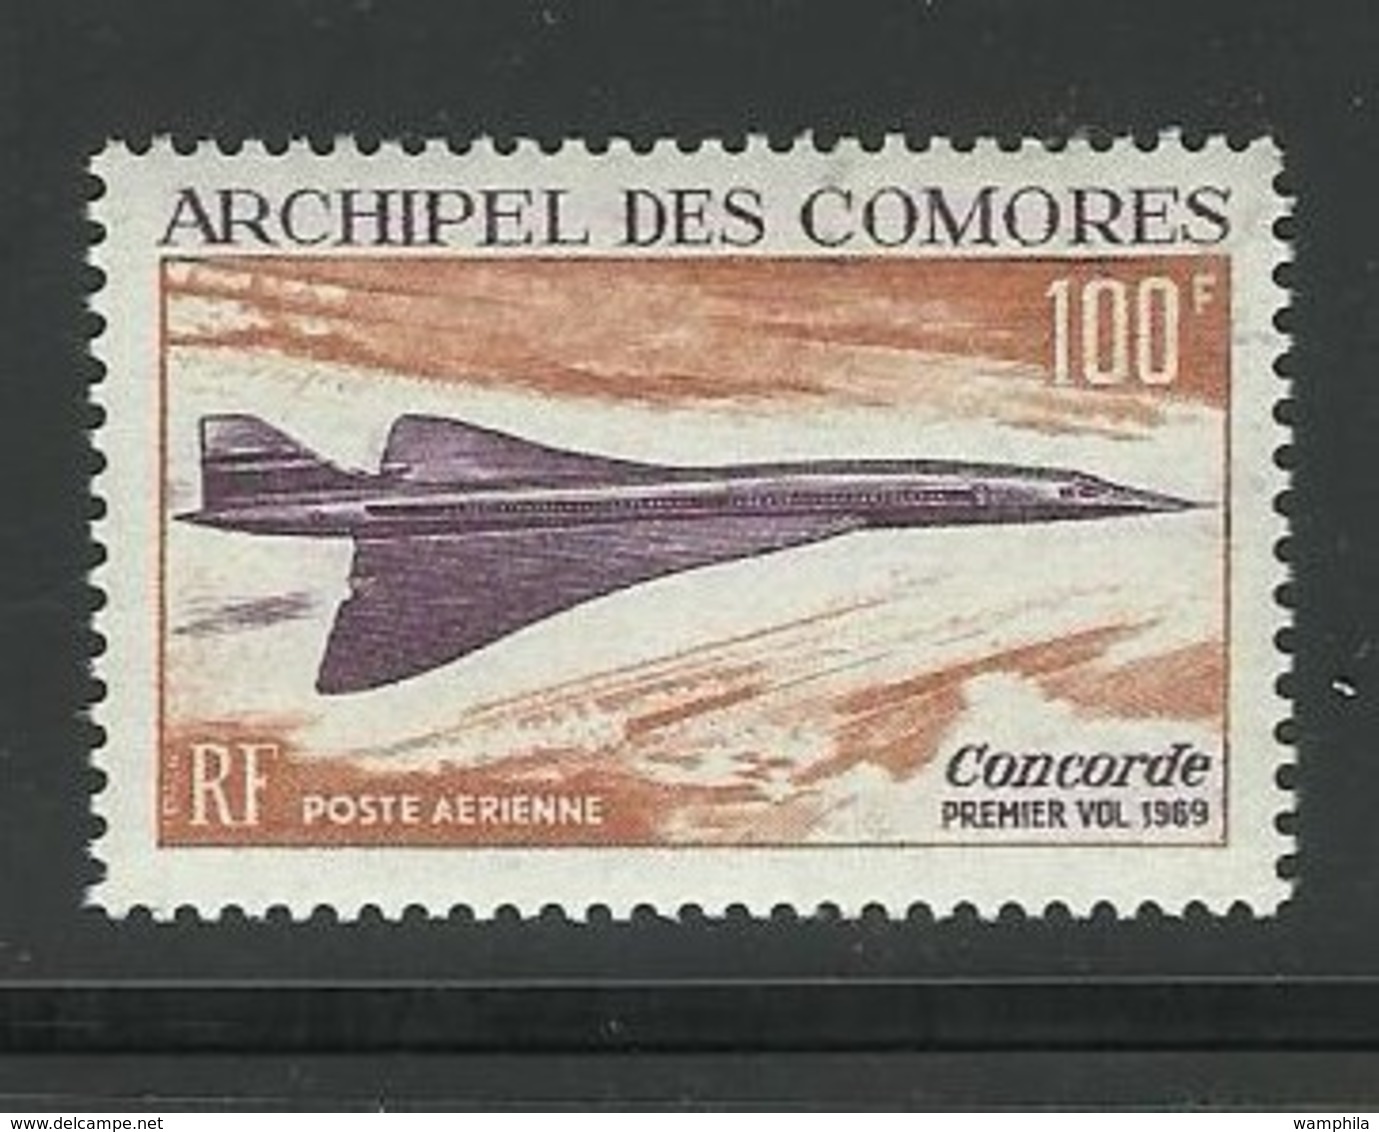 Concorde 1er Vol 1969, Comores PA 29 Neuf ** MNH Cote YT 24€ - Airmail